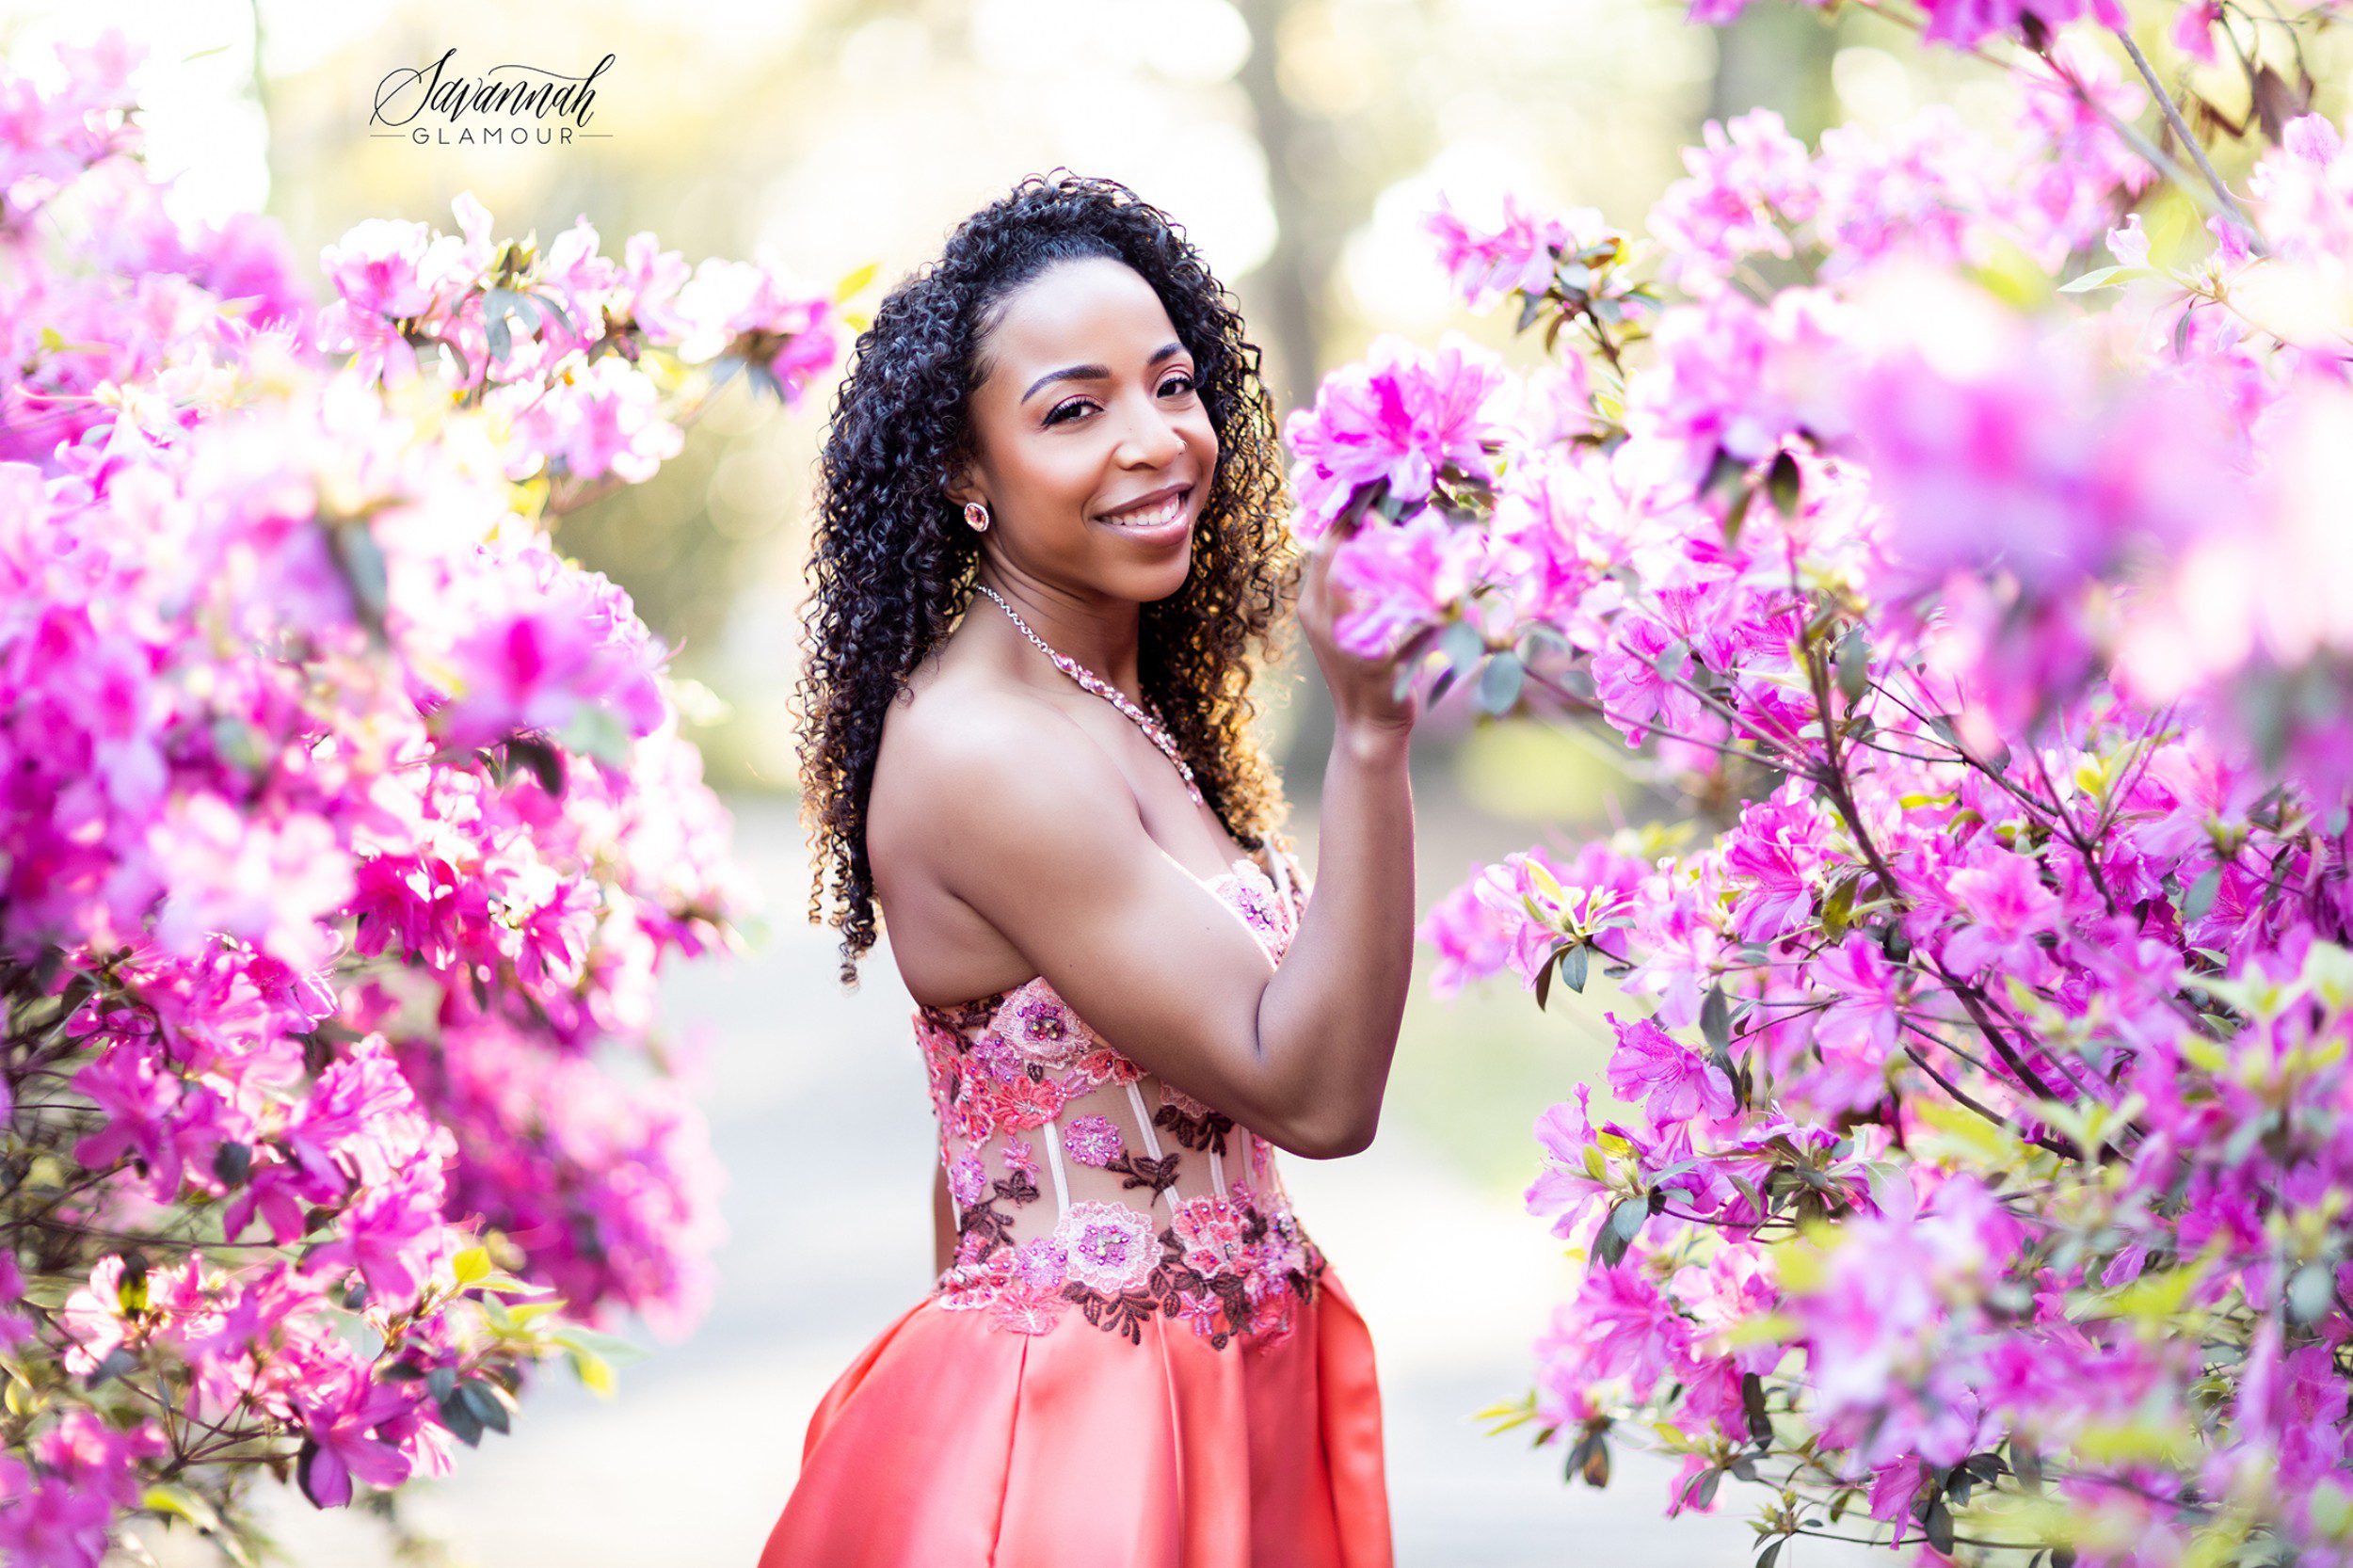 A young woman in a pink dress posing in front of pink flowers.